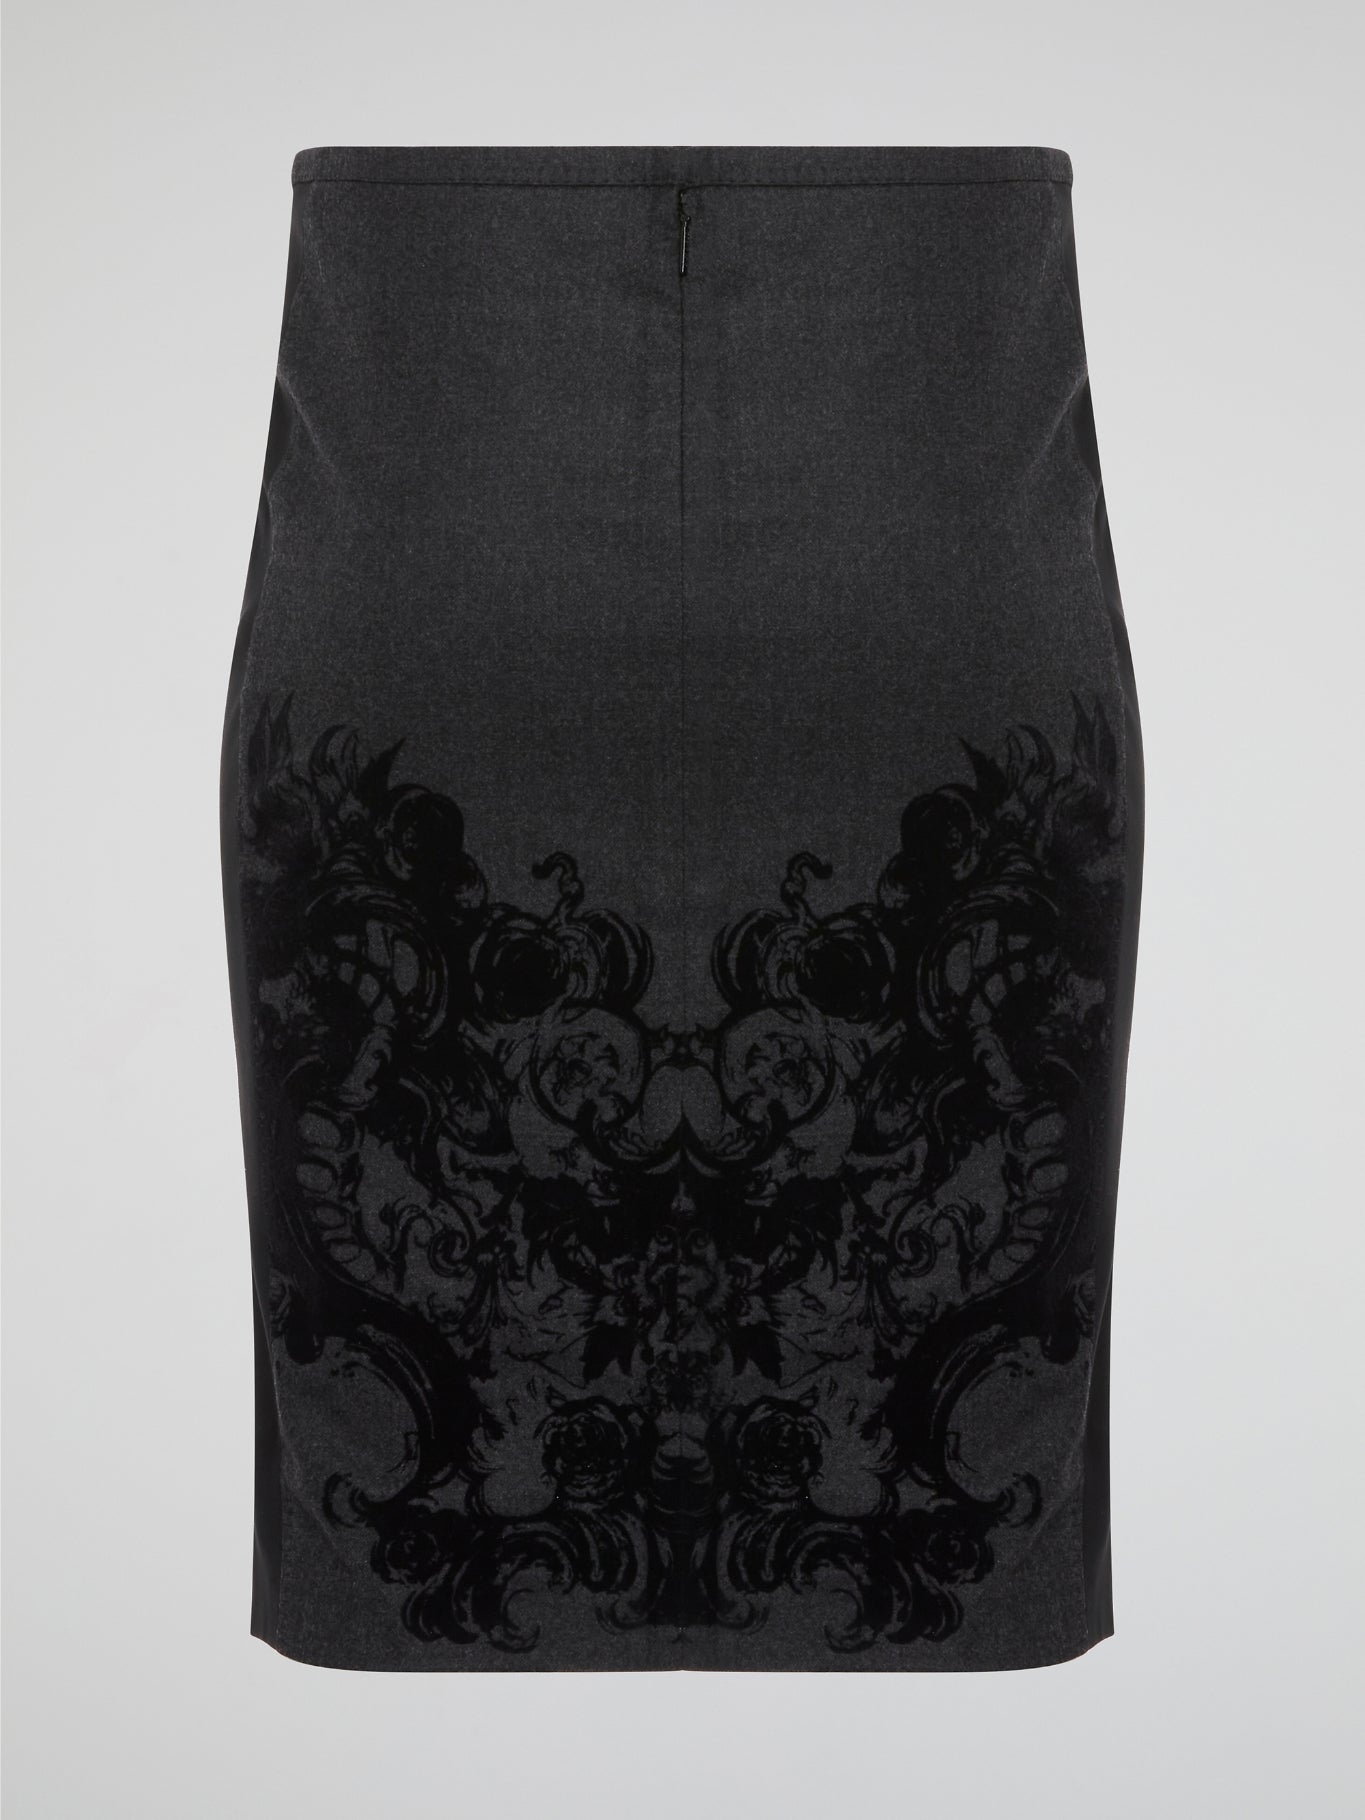 Elevate your office attire with this stunning grey printed pencil skirt from iconic designer Roberto Cavalli. The intricate pattern adds a touch of sophistication and style, making you stand out from the crowd. Pair it with a crisp white blouse and heels for a polished and fashion-forward look that will turn heads wherever you go.